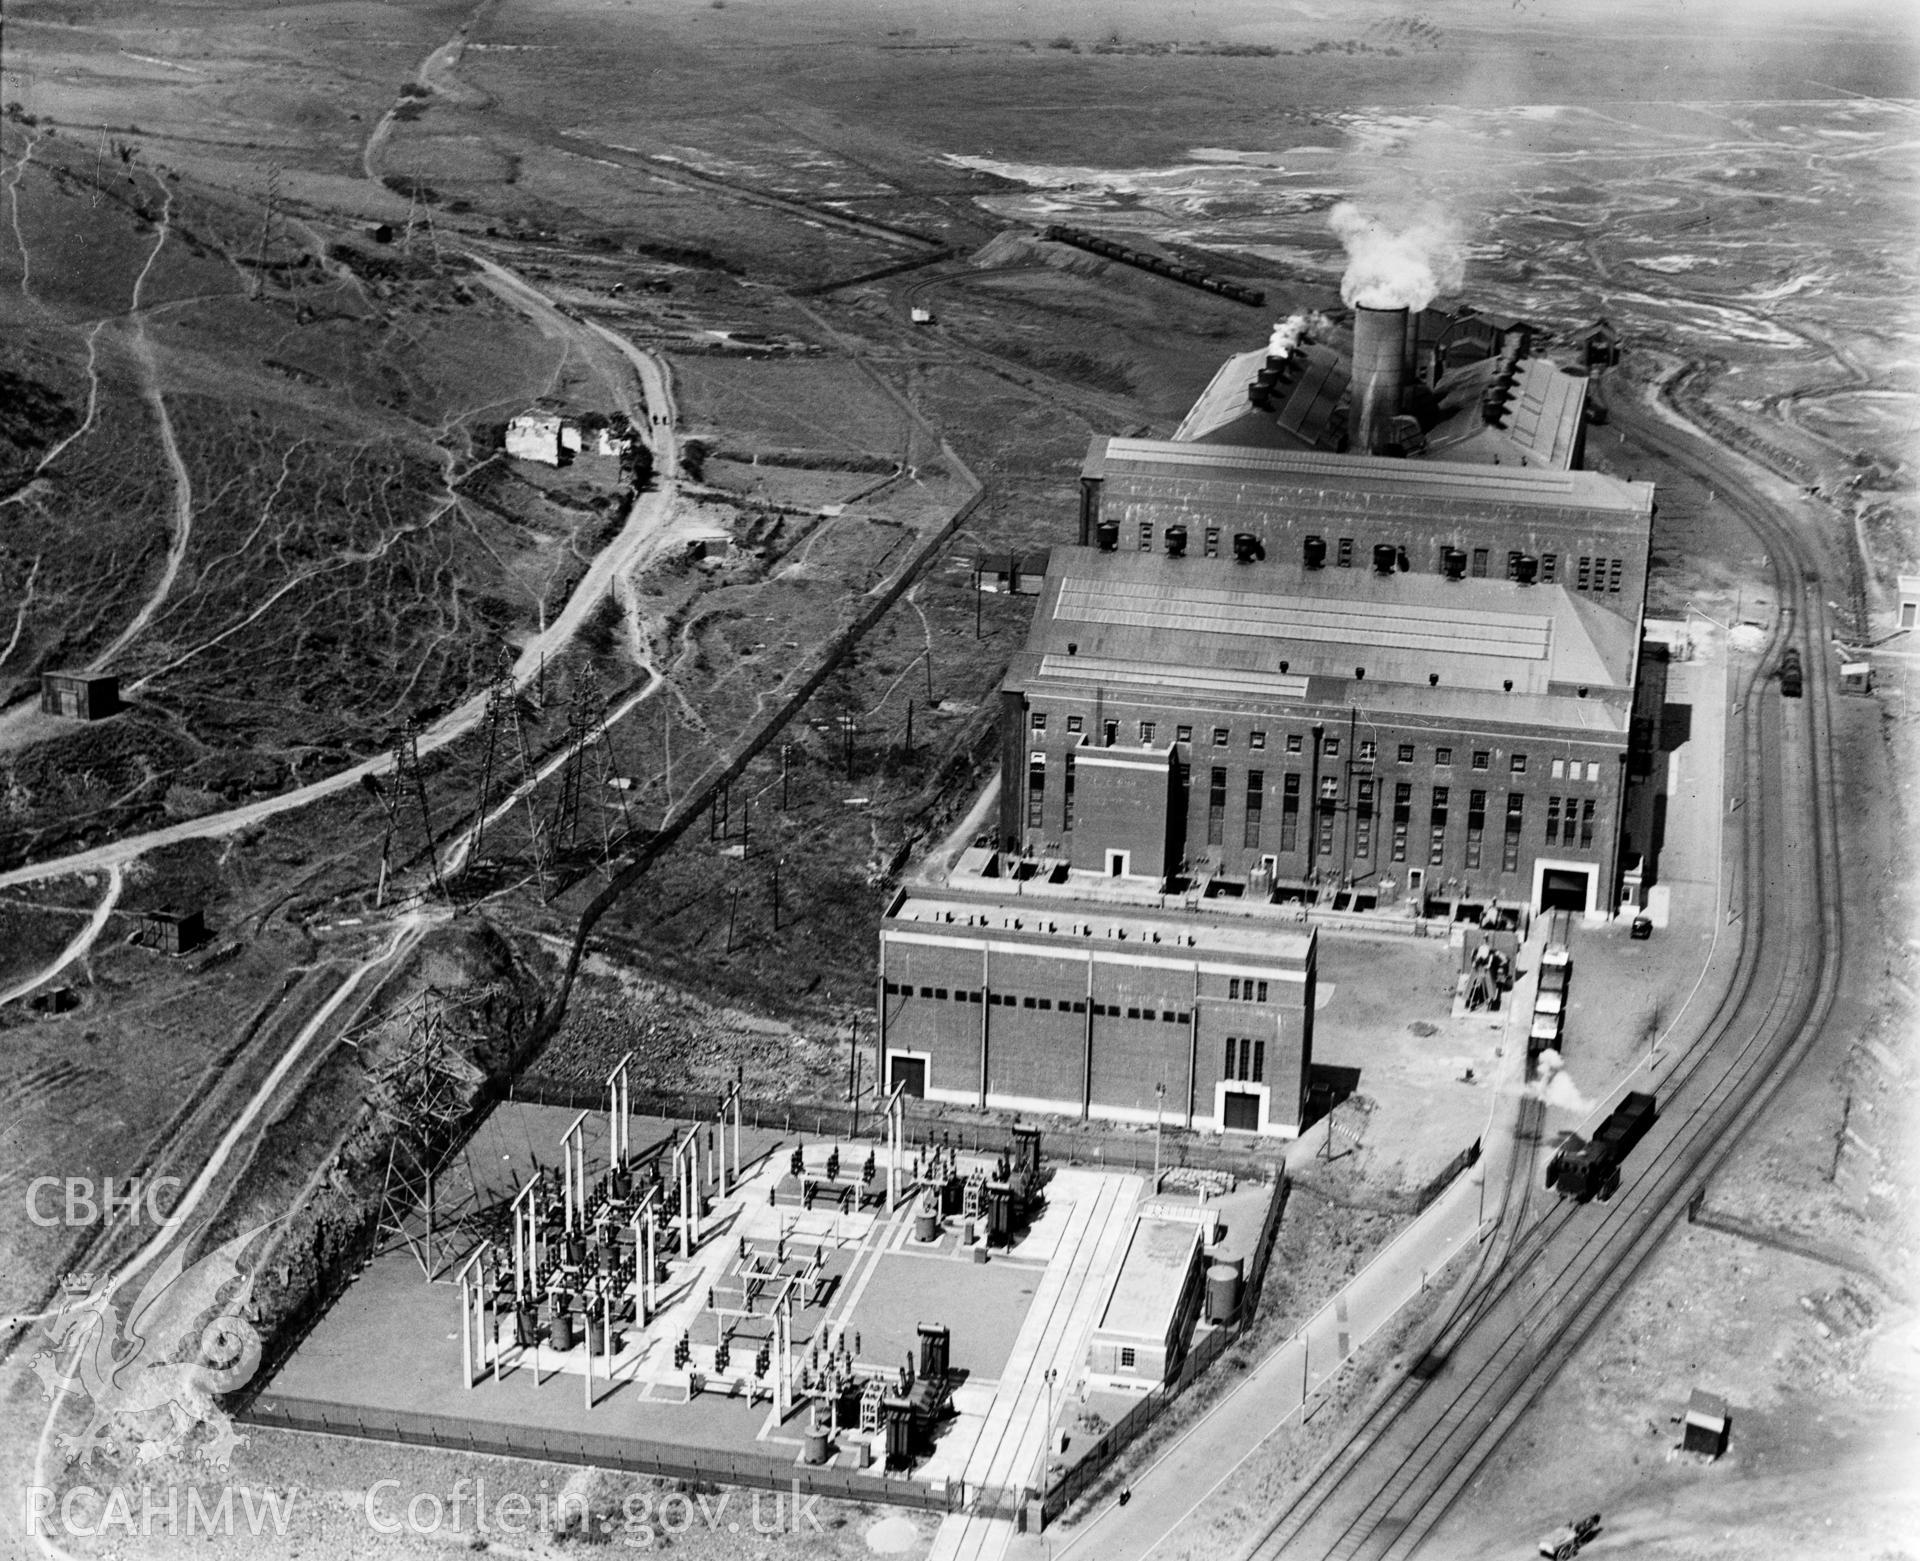 View of Tir John power station, Swansea (A.R.P. County Borough of Swansea), oblique aerial view. 5?x4? black and white glass plate negative.